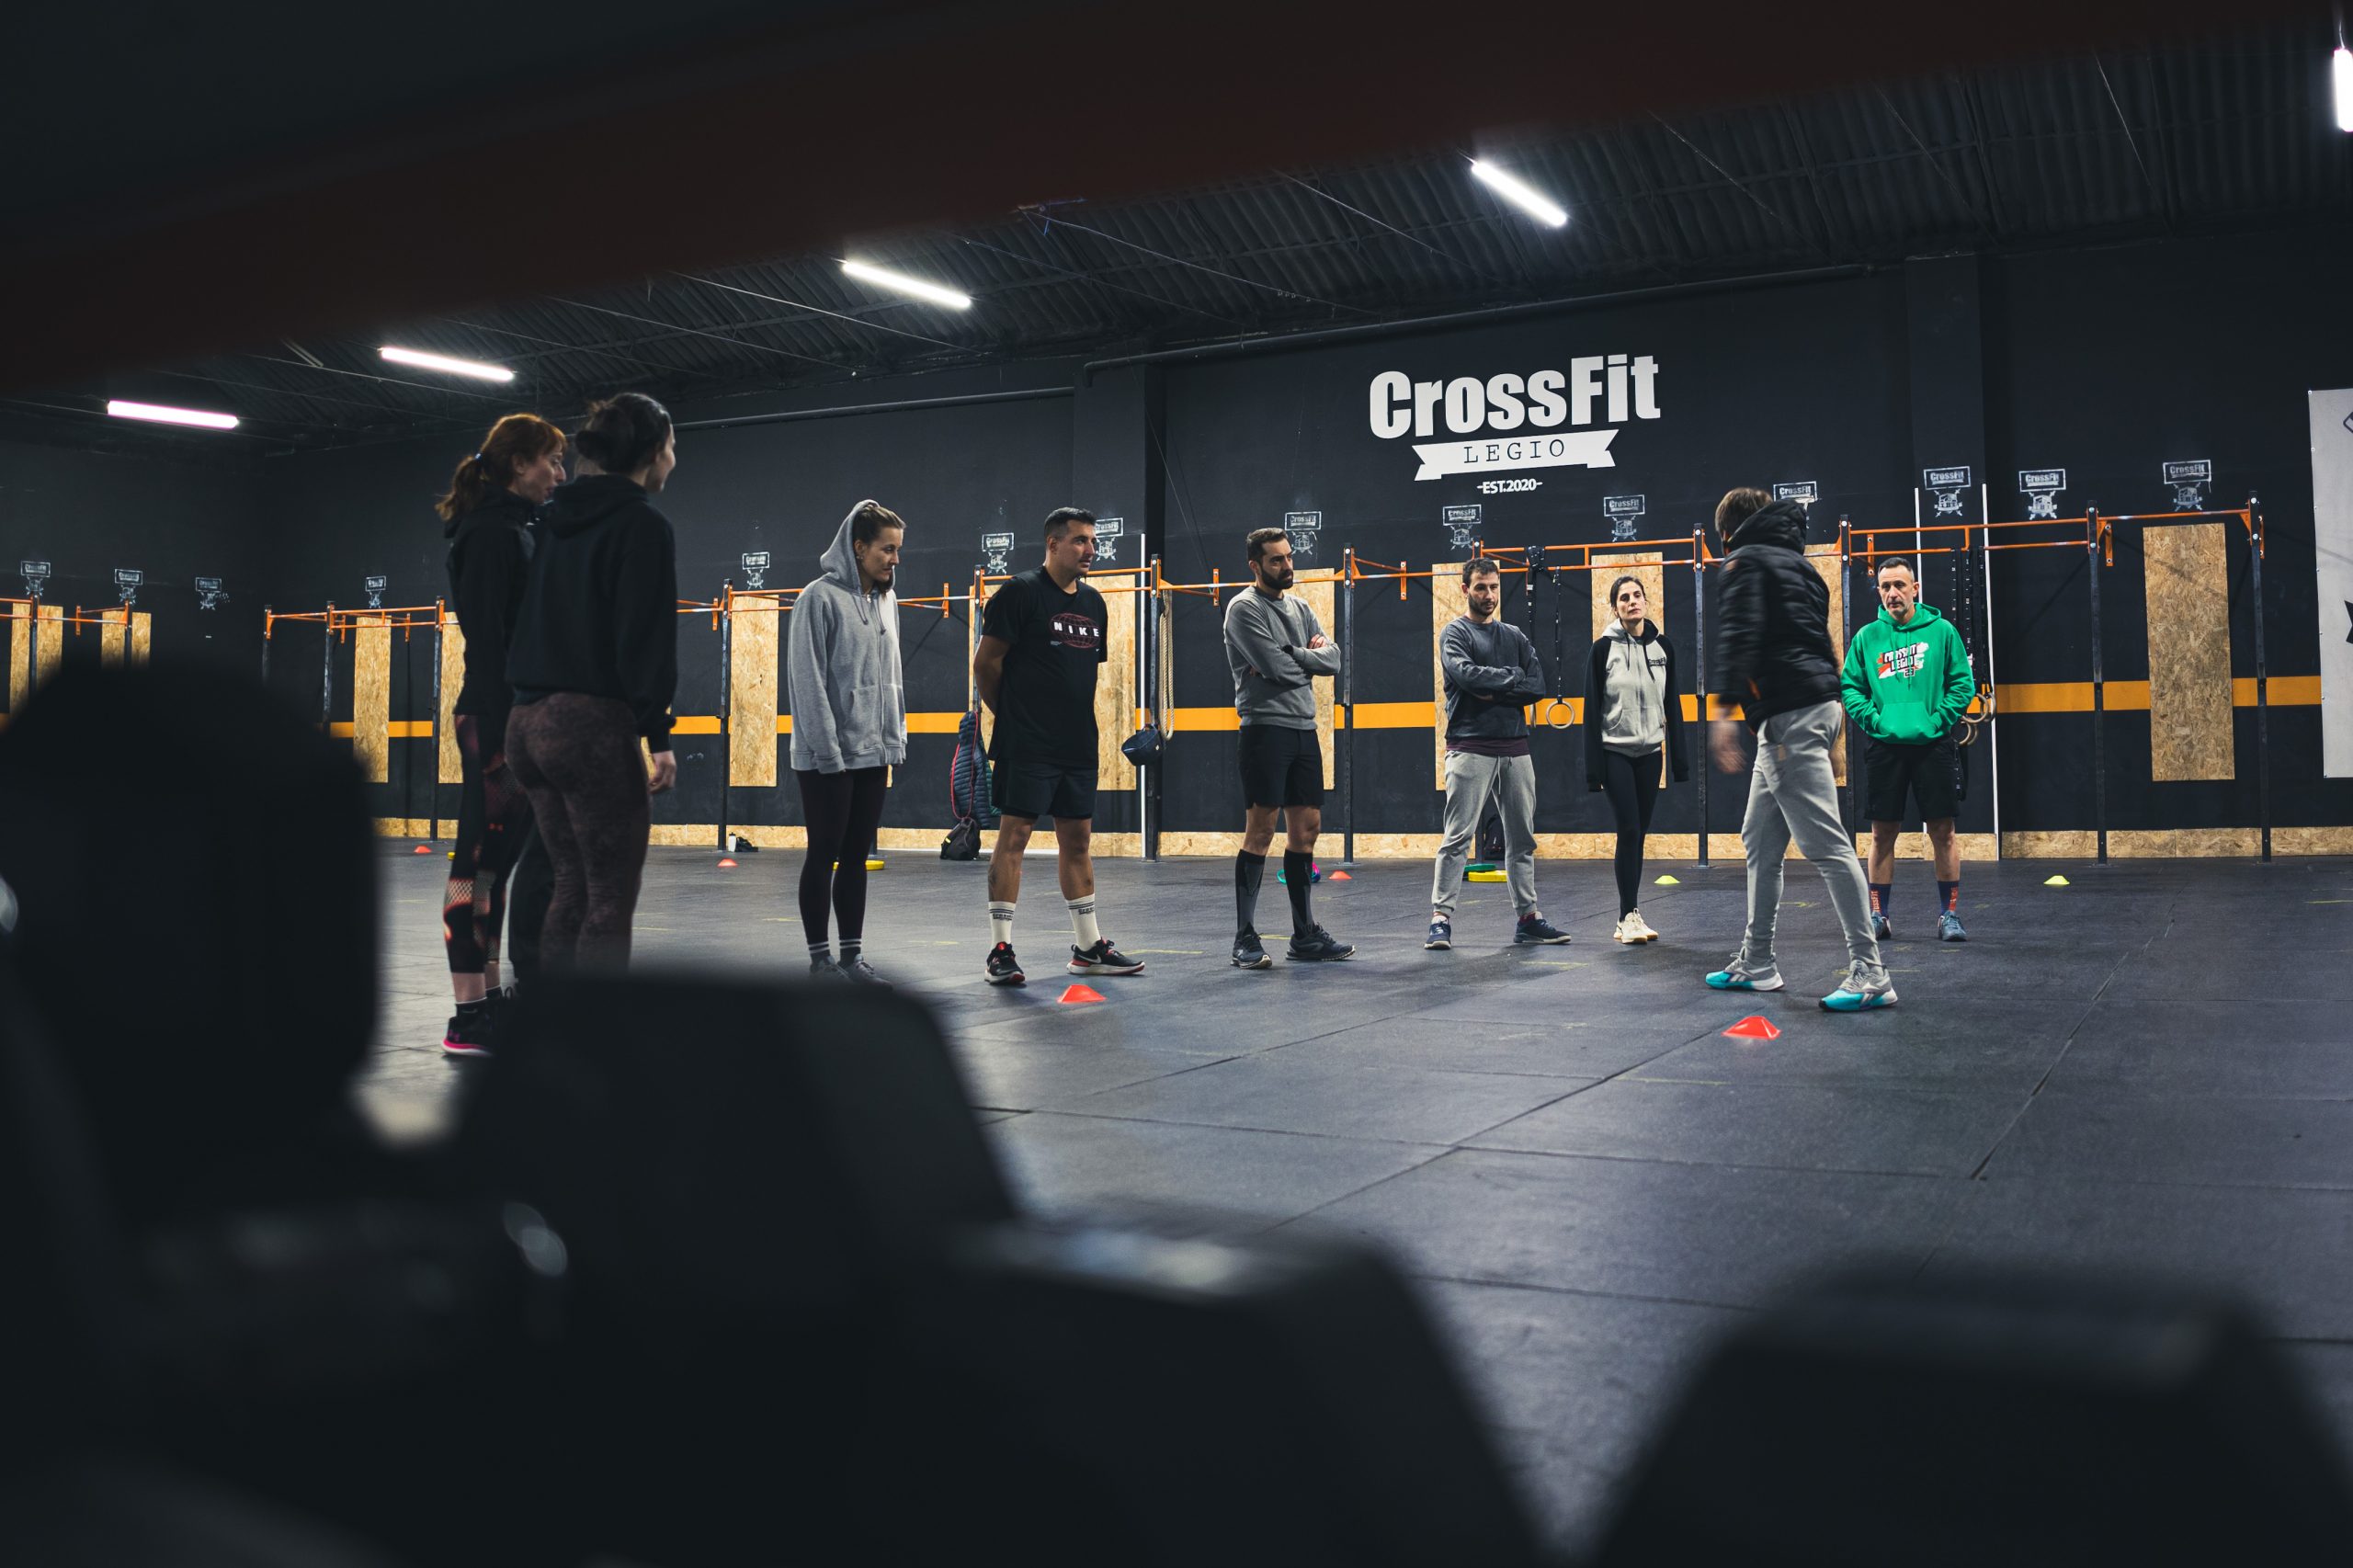 Aperture, Shutter Speed, AND ISO for Indoor CrossFit Photography